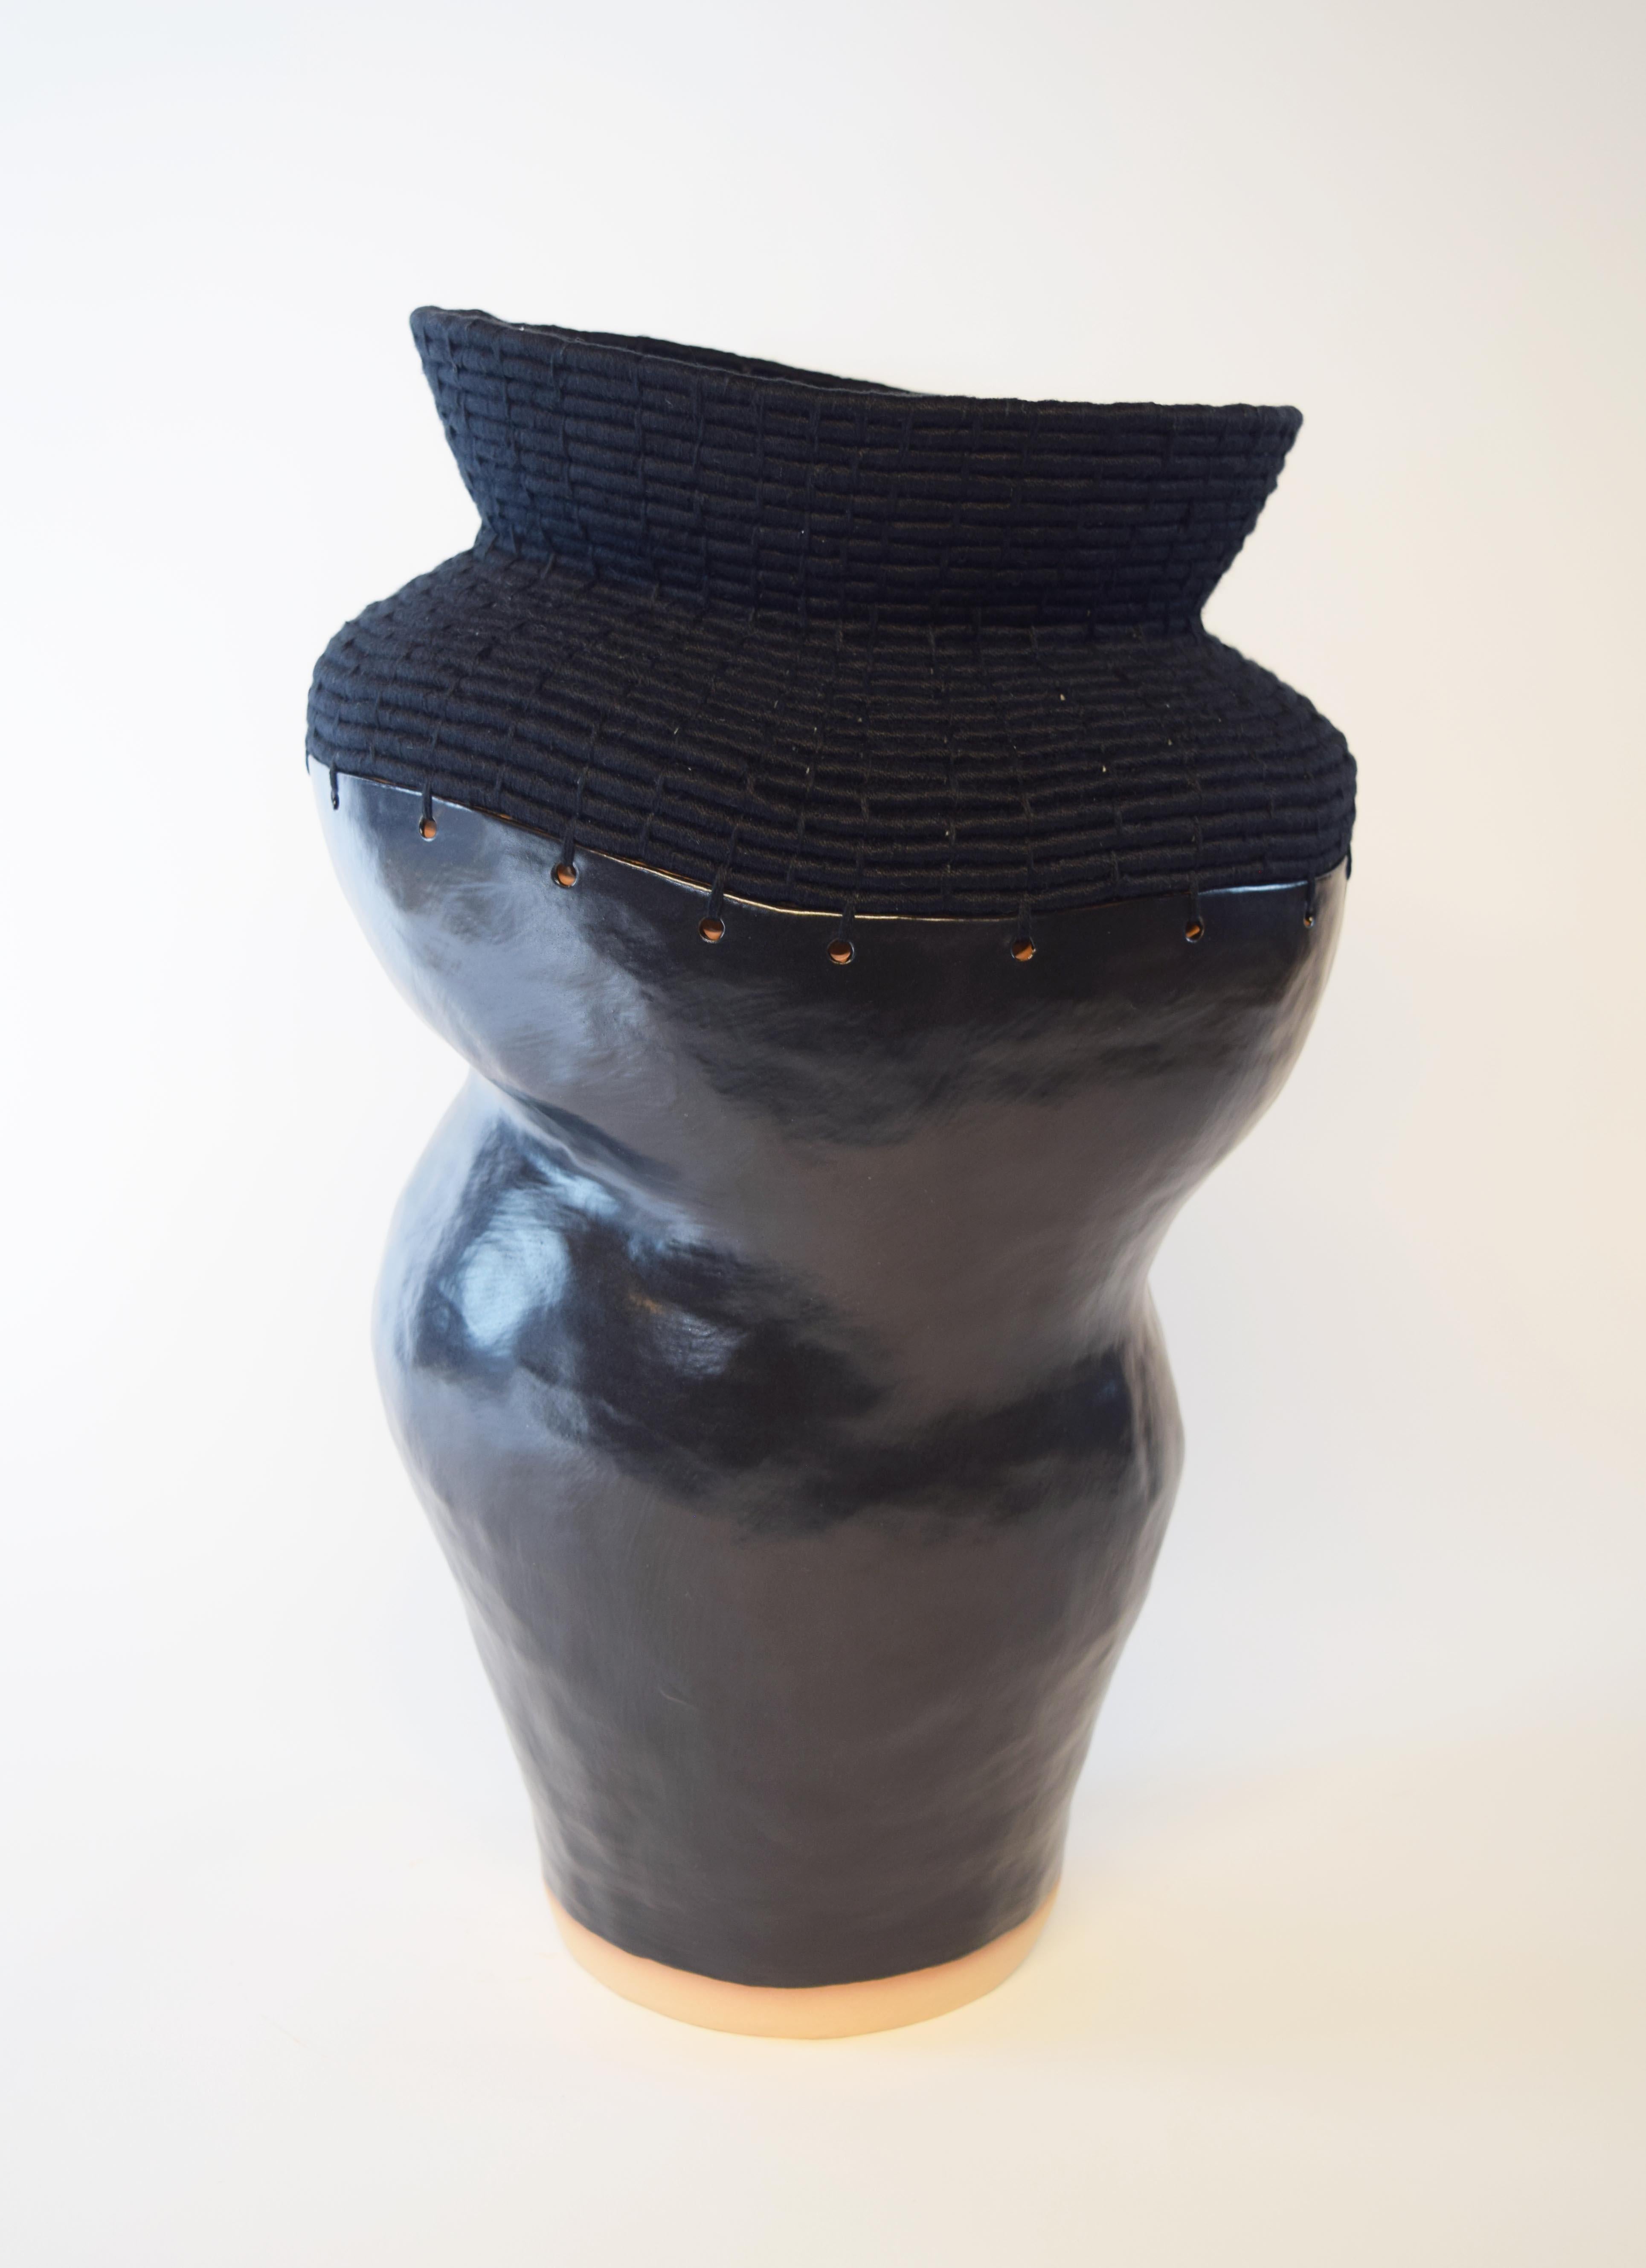 762 Black vessel by Karen Gayle Tinney
Dimensions: D 25.5 x W 25.5 x H 46 cm 
Material: Stoneware with cream, shino glaze, Black cotton.

Karen Gayle Tinney is an artist and designer whose work consists of pieces that combine ceramic and fiber,